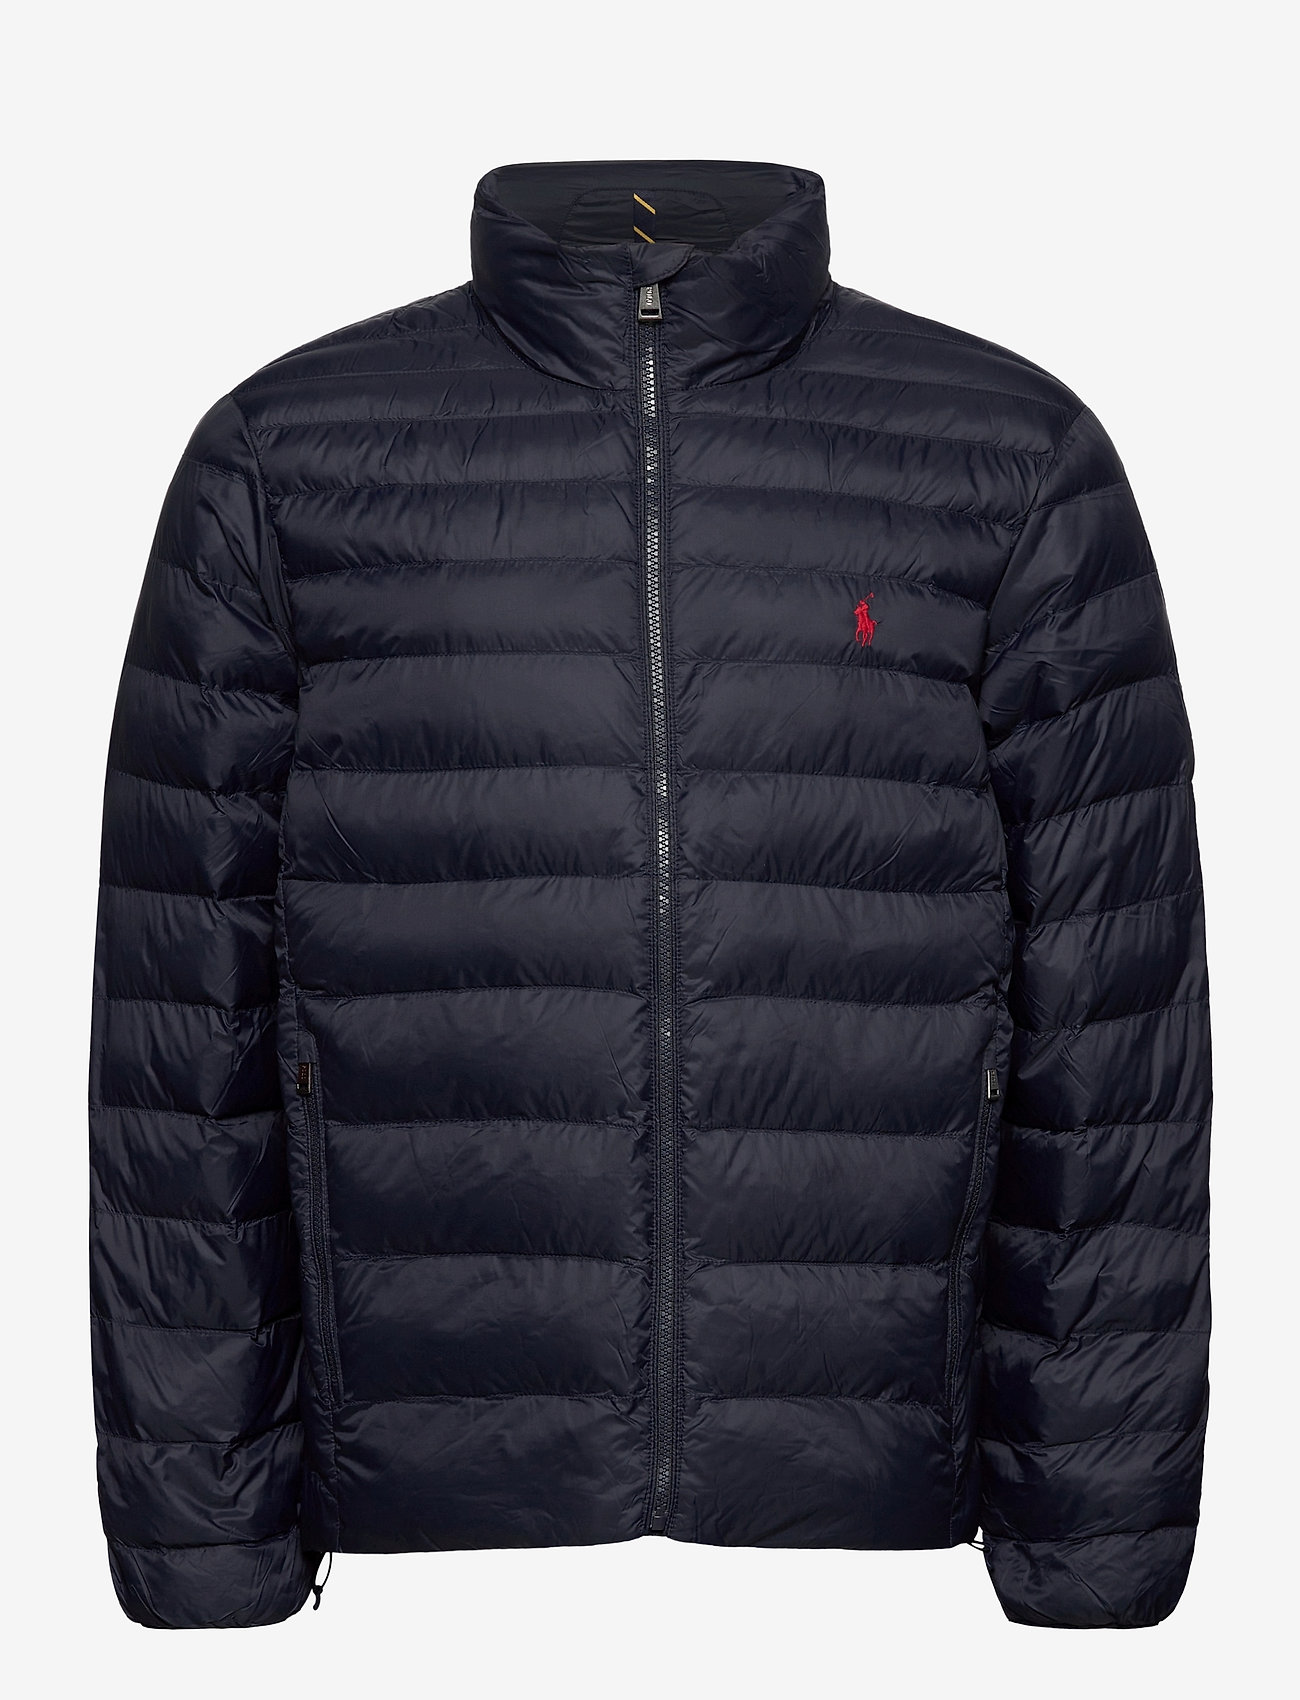 Polo Ralph Lauren - The Packable Jacket - kurtki puchowe - collection navy - 1